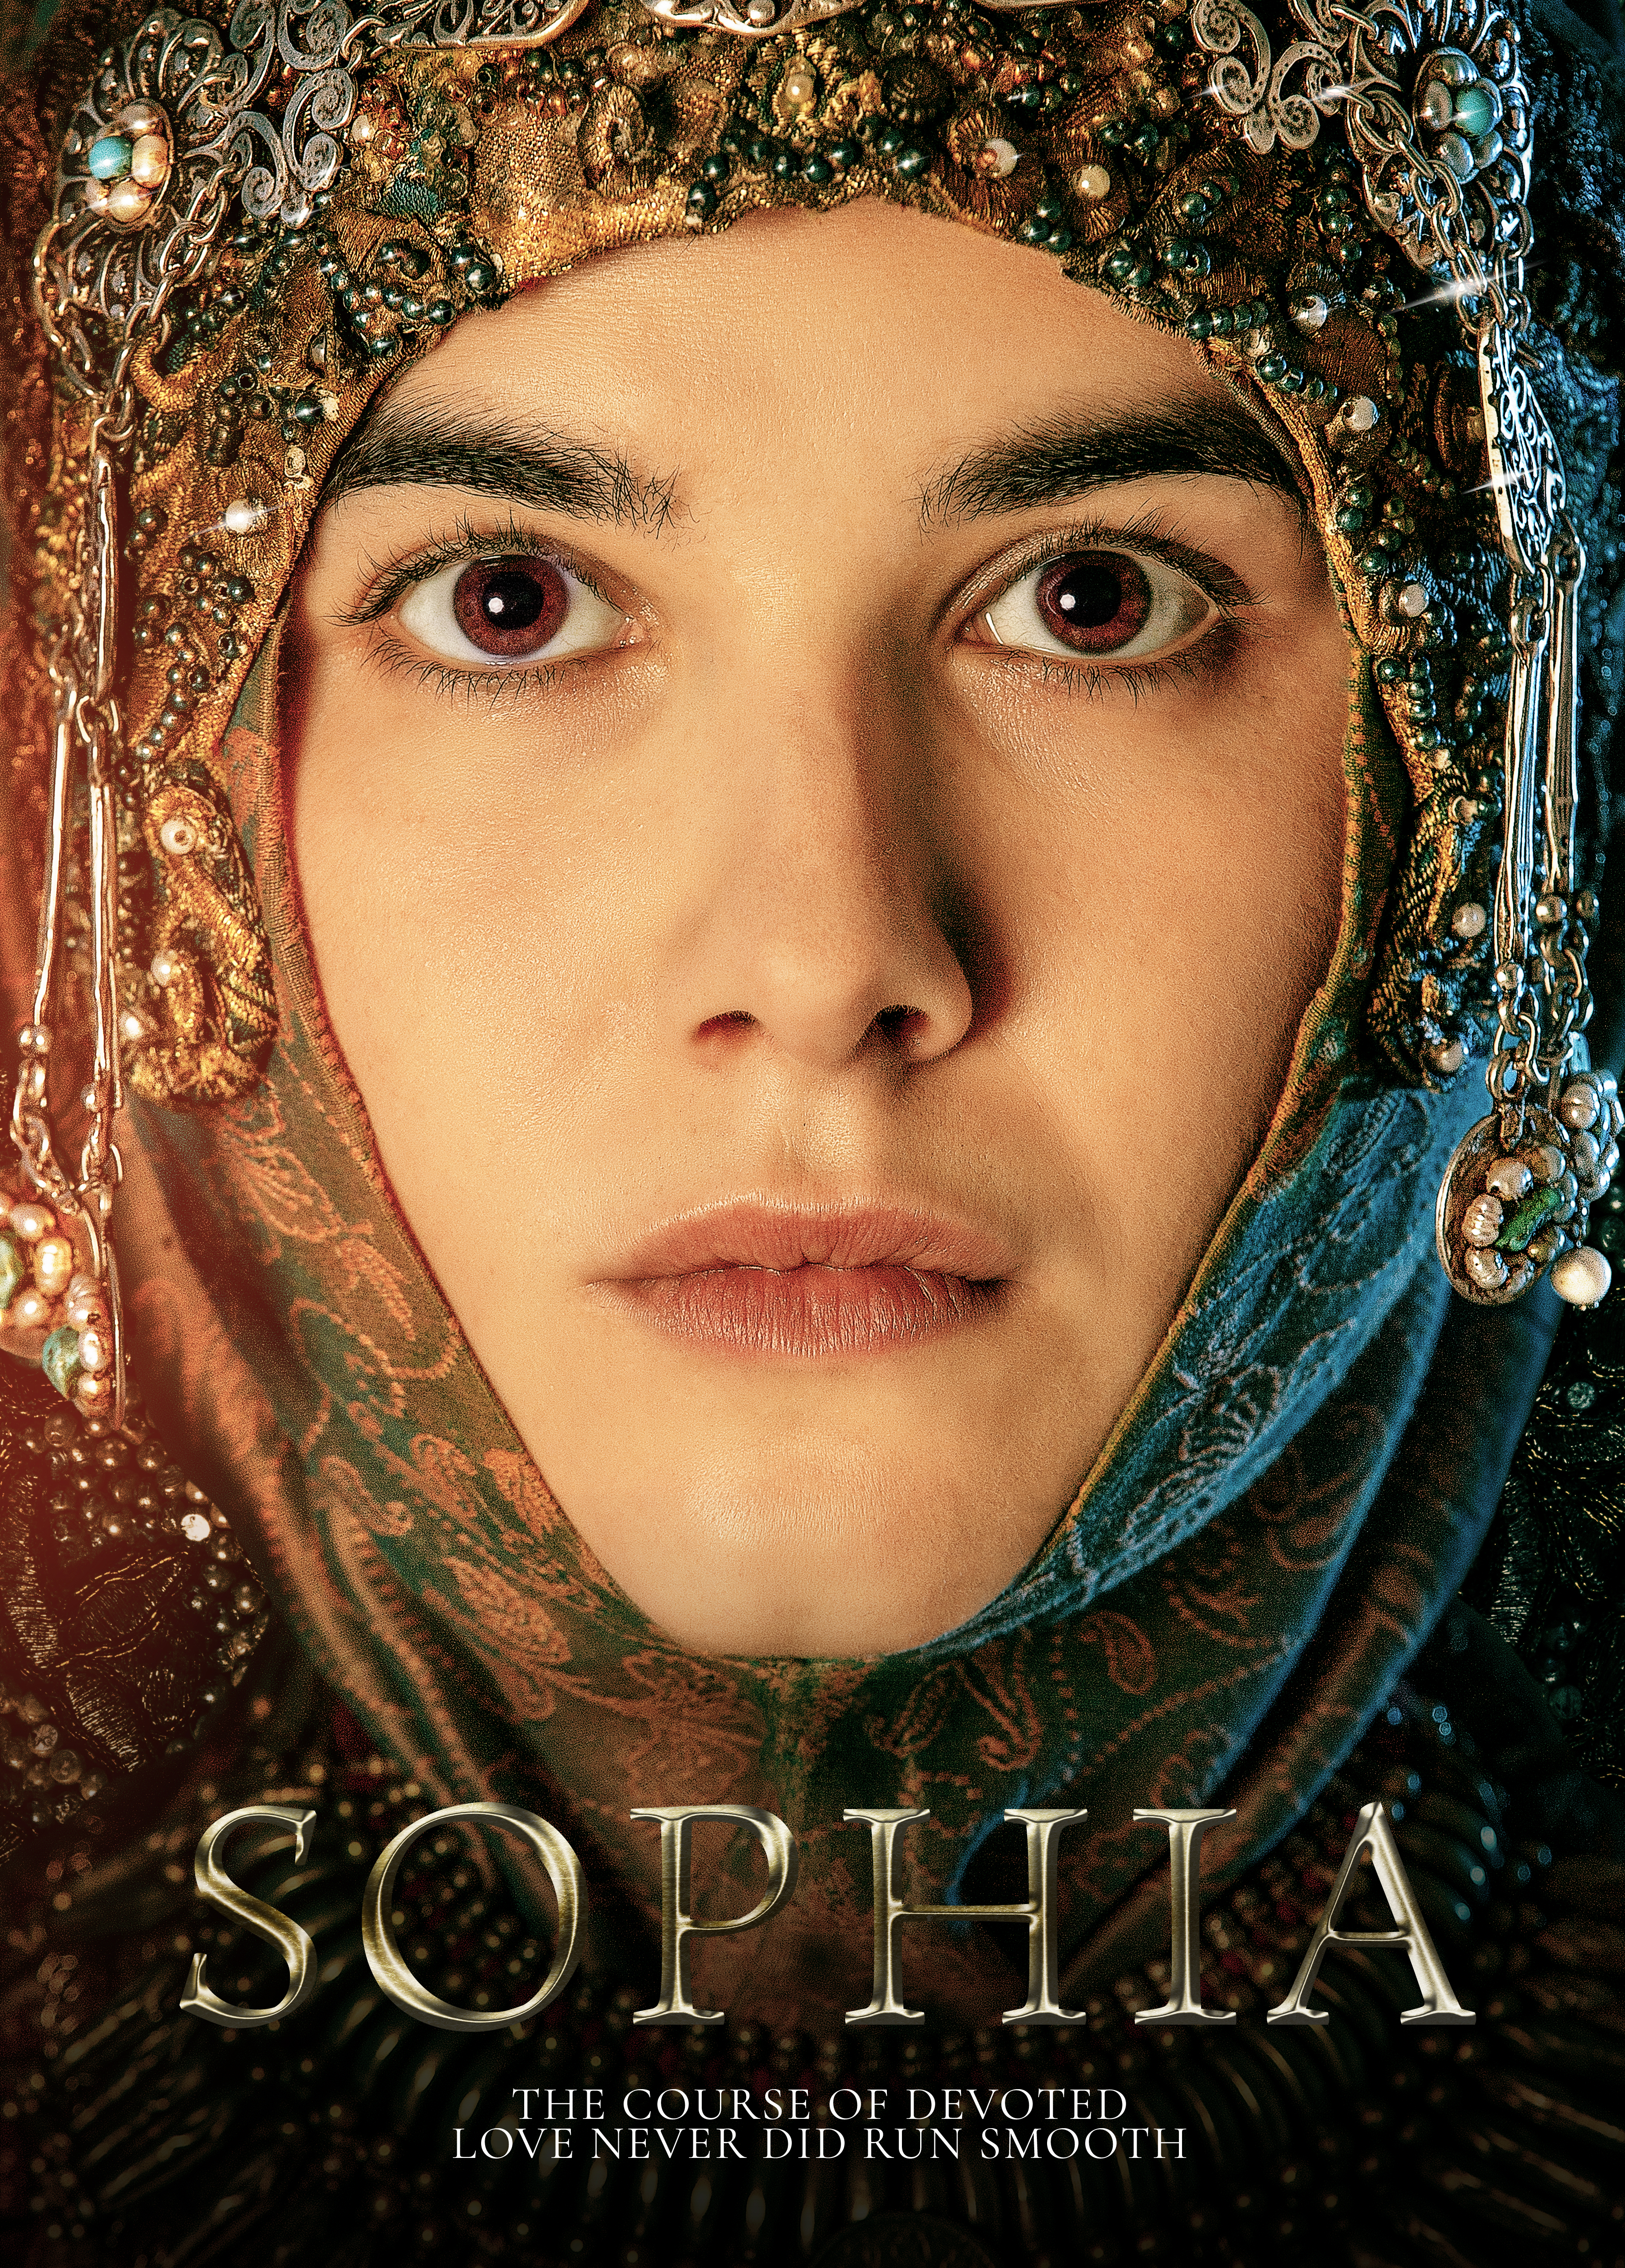 STATE CHANNEL SEÑAL COLOMBIA WILL AIR A PERIOD DRAMA "SOPHIA"